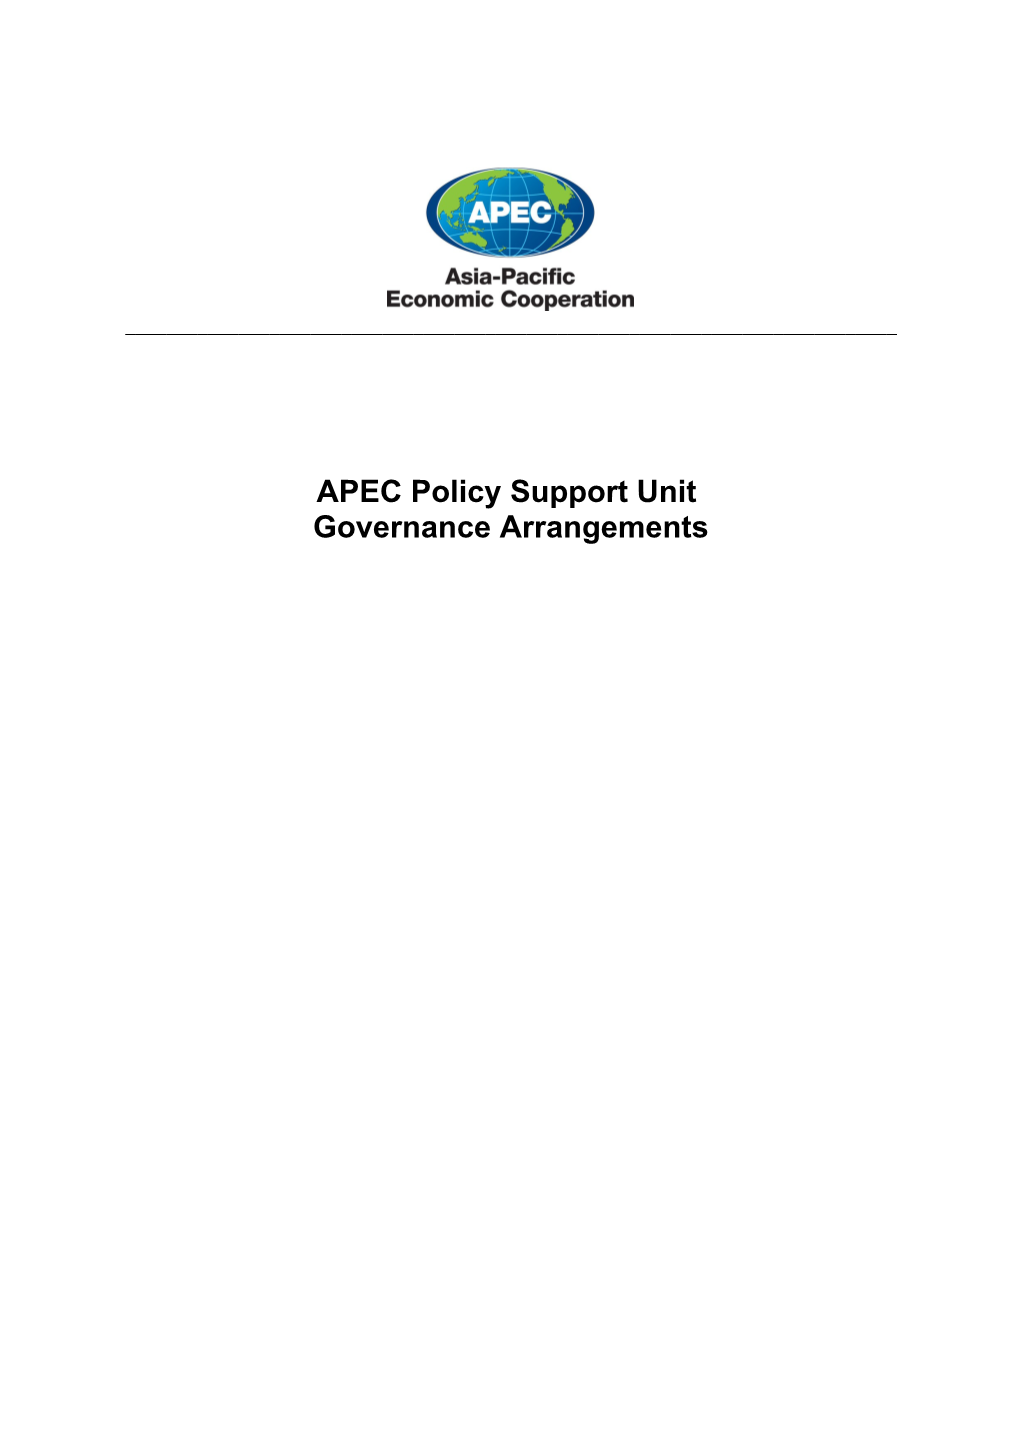 APEC Policy Support Unit